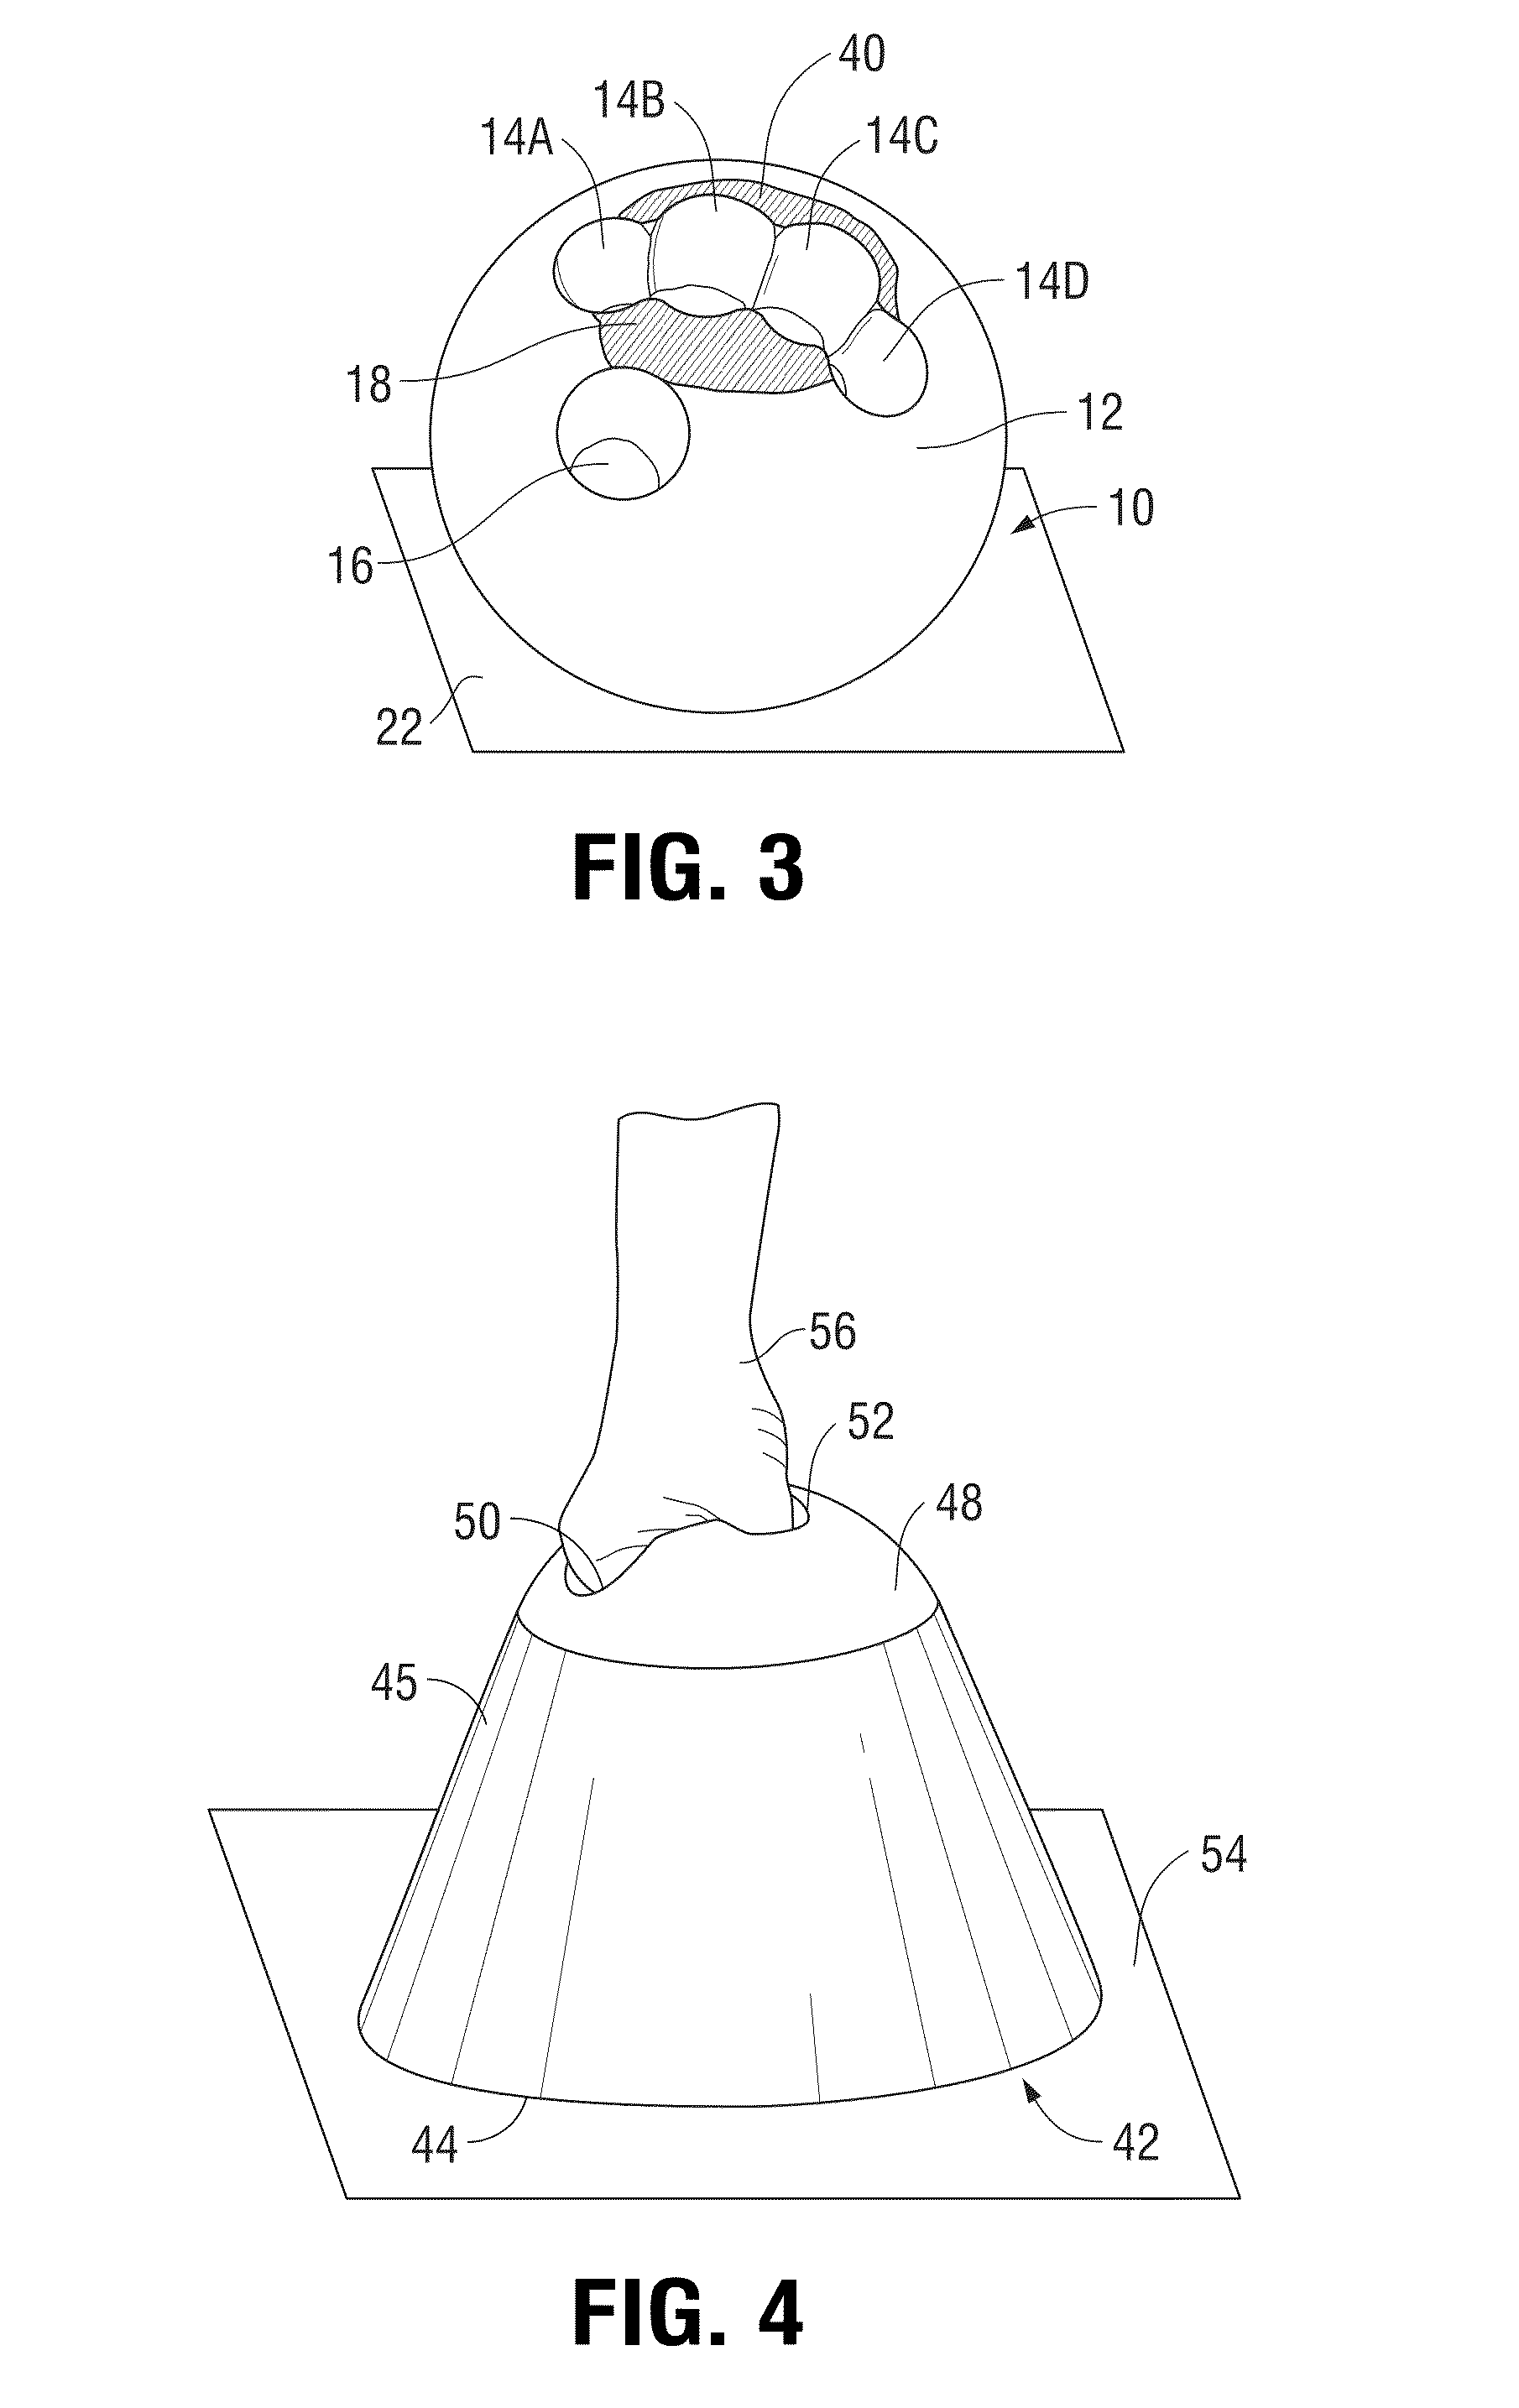 Wrist support device